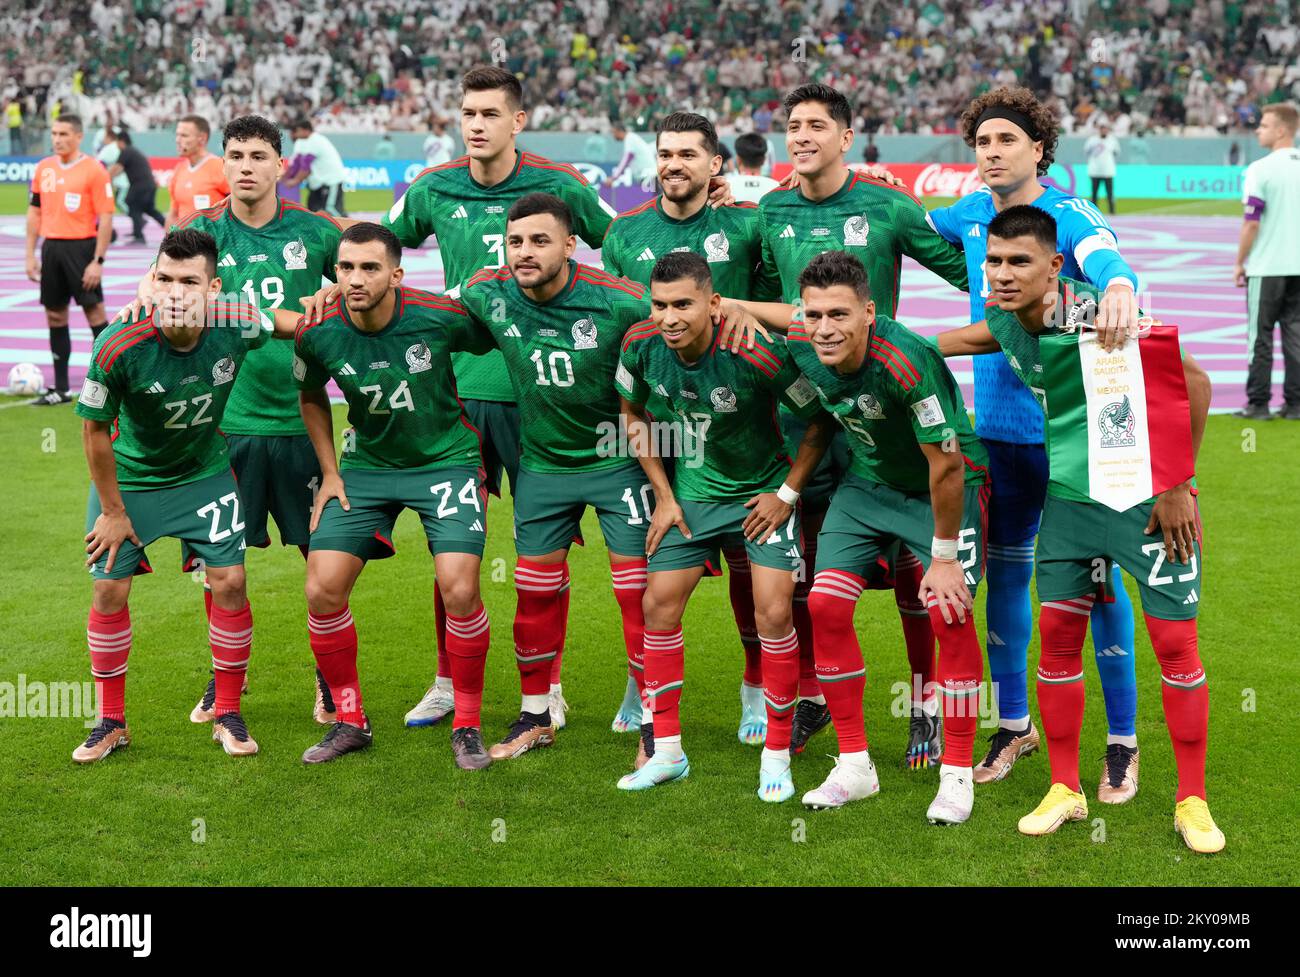 Mexico players, back row, left to right, Jorge Sanchez, Cesar Montes, Henry Martin, Edson Alvarez, Guillermo Ochoa, front row, left to right, Hirving Lozano, Luis Chavez, Alexis Vega, Orbelin Pineda, Hector Moreno and Jesus Gallardo line up before the FIFA World Cup Group C match at the Lusail Stadium in Lusail, Qatar. Picture date: Wednesday November 30, 2022. Stock Photo